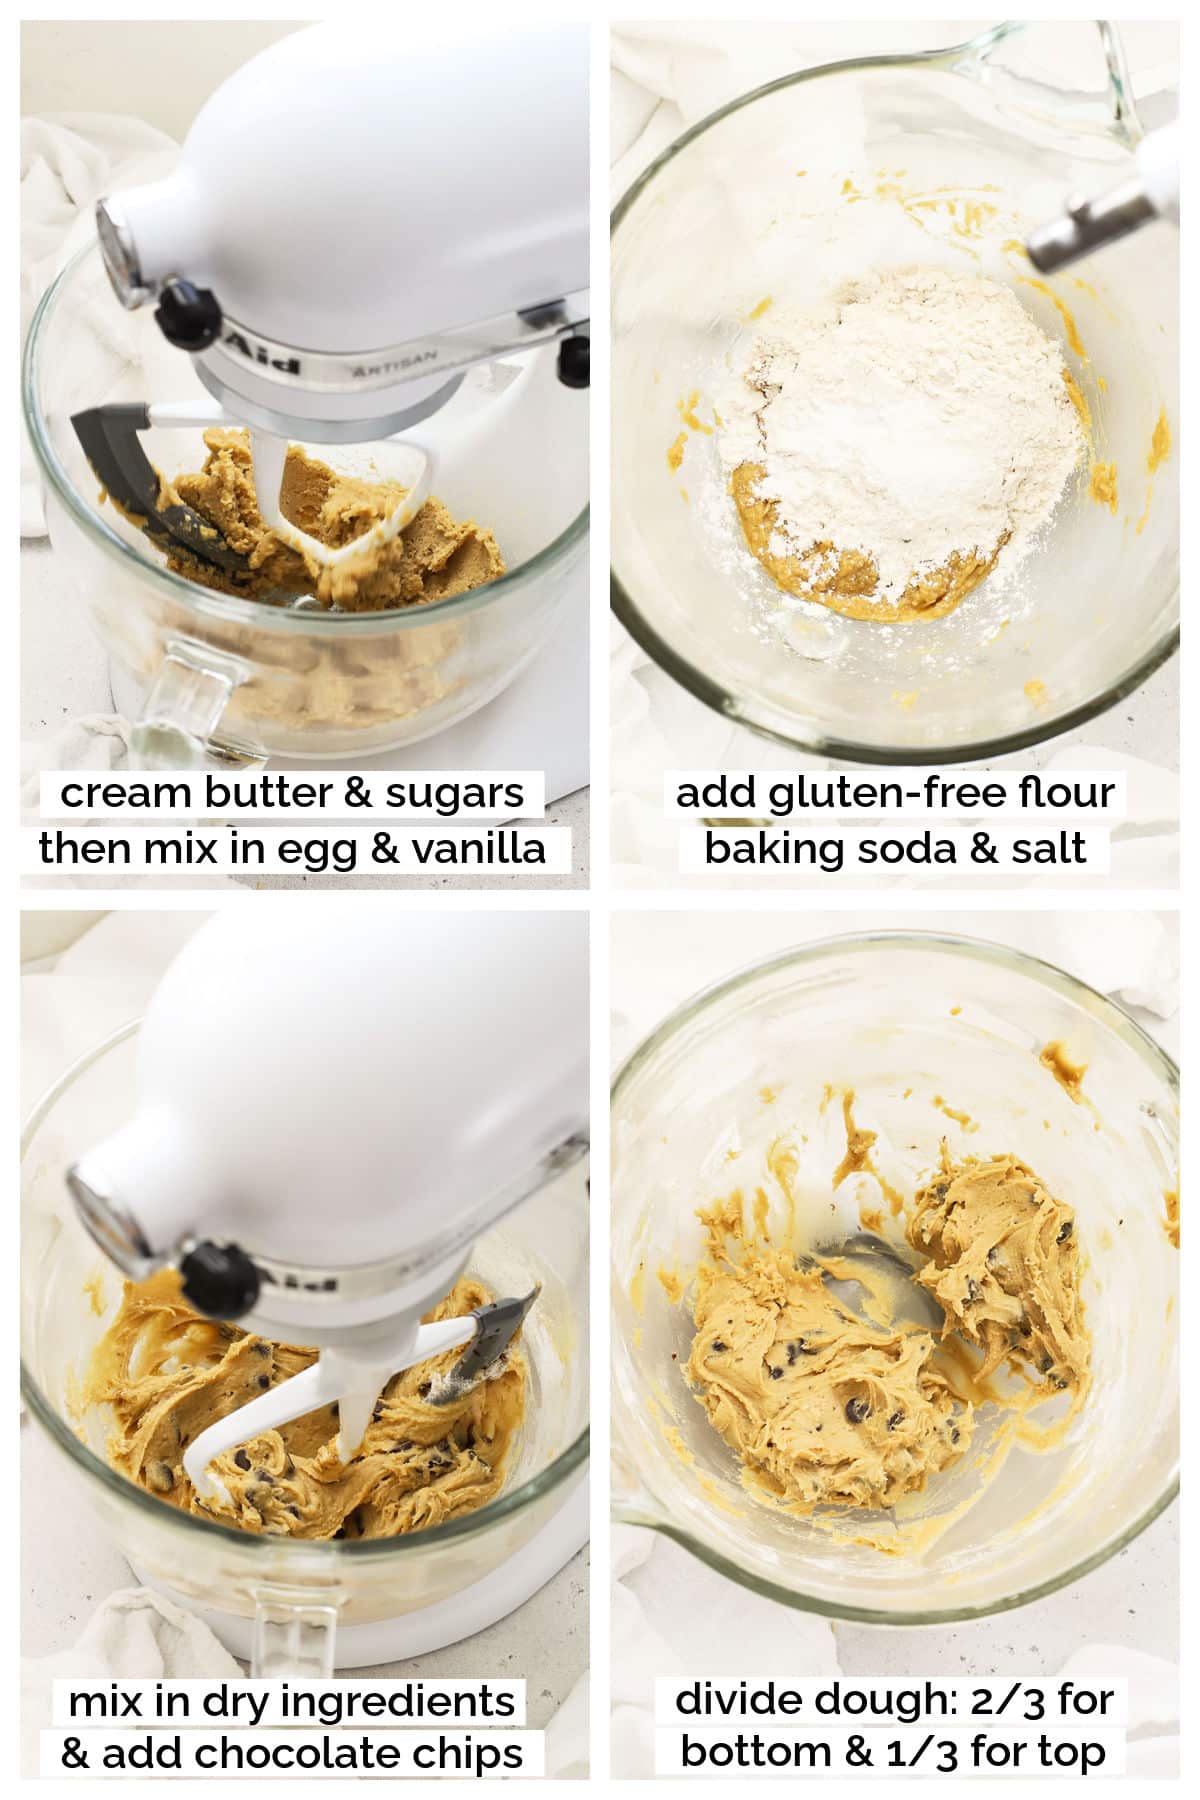 making gluten-free cookie layer step by step